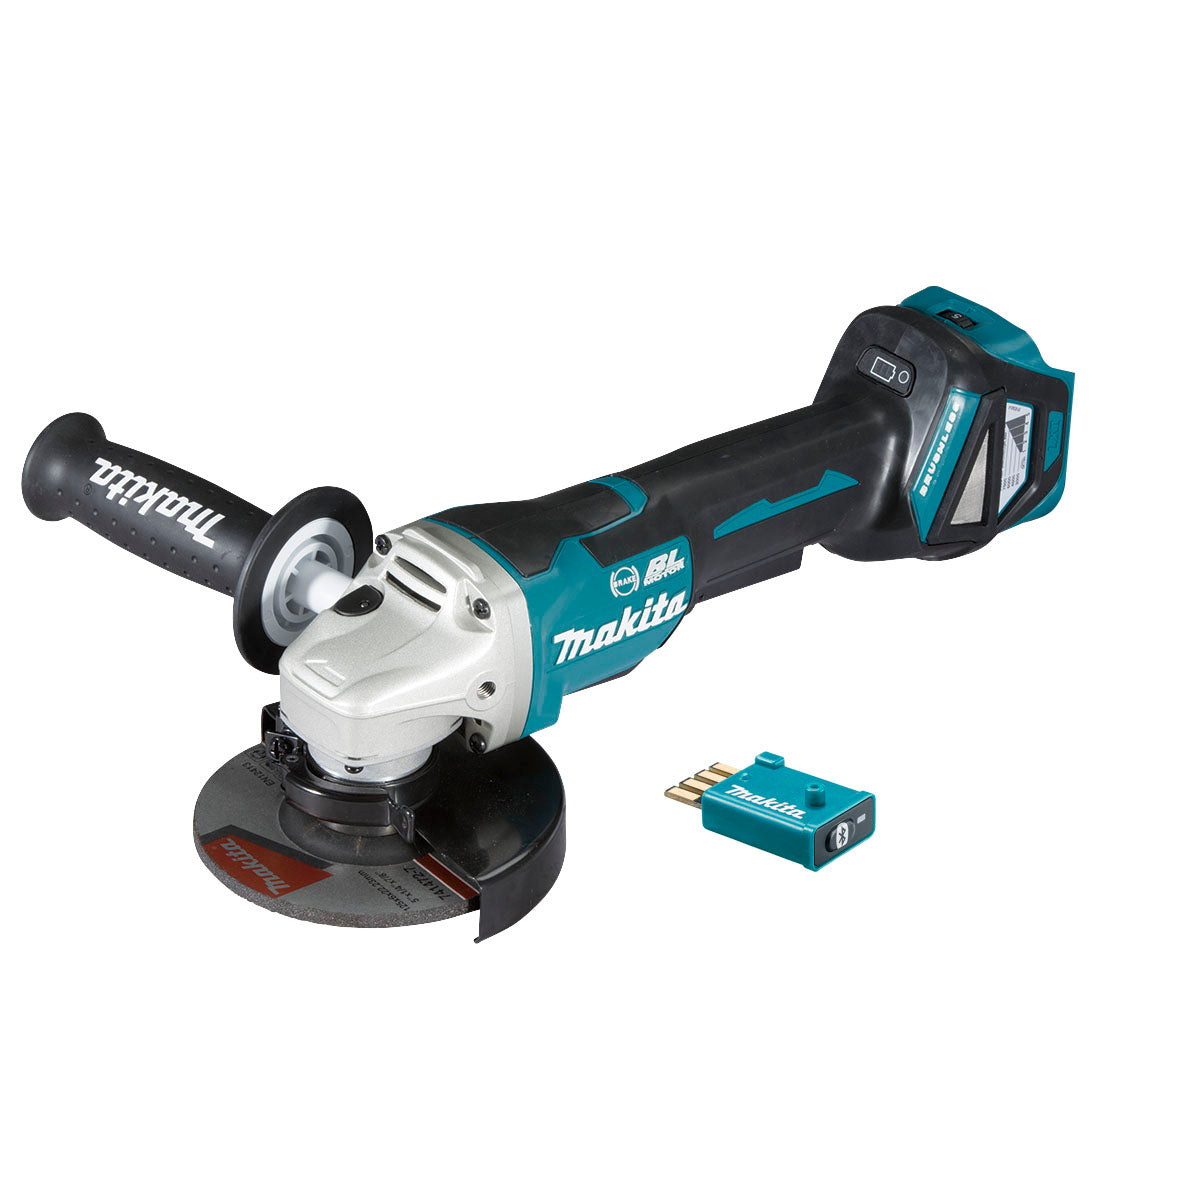 18V 125mm Brushless AWS Paddle Switch Angle Grinder Bare (Tool Only) DGA518ZU by Makita